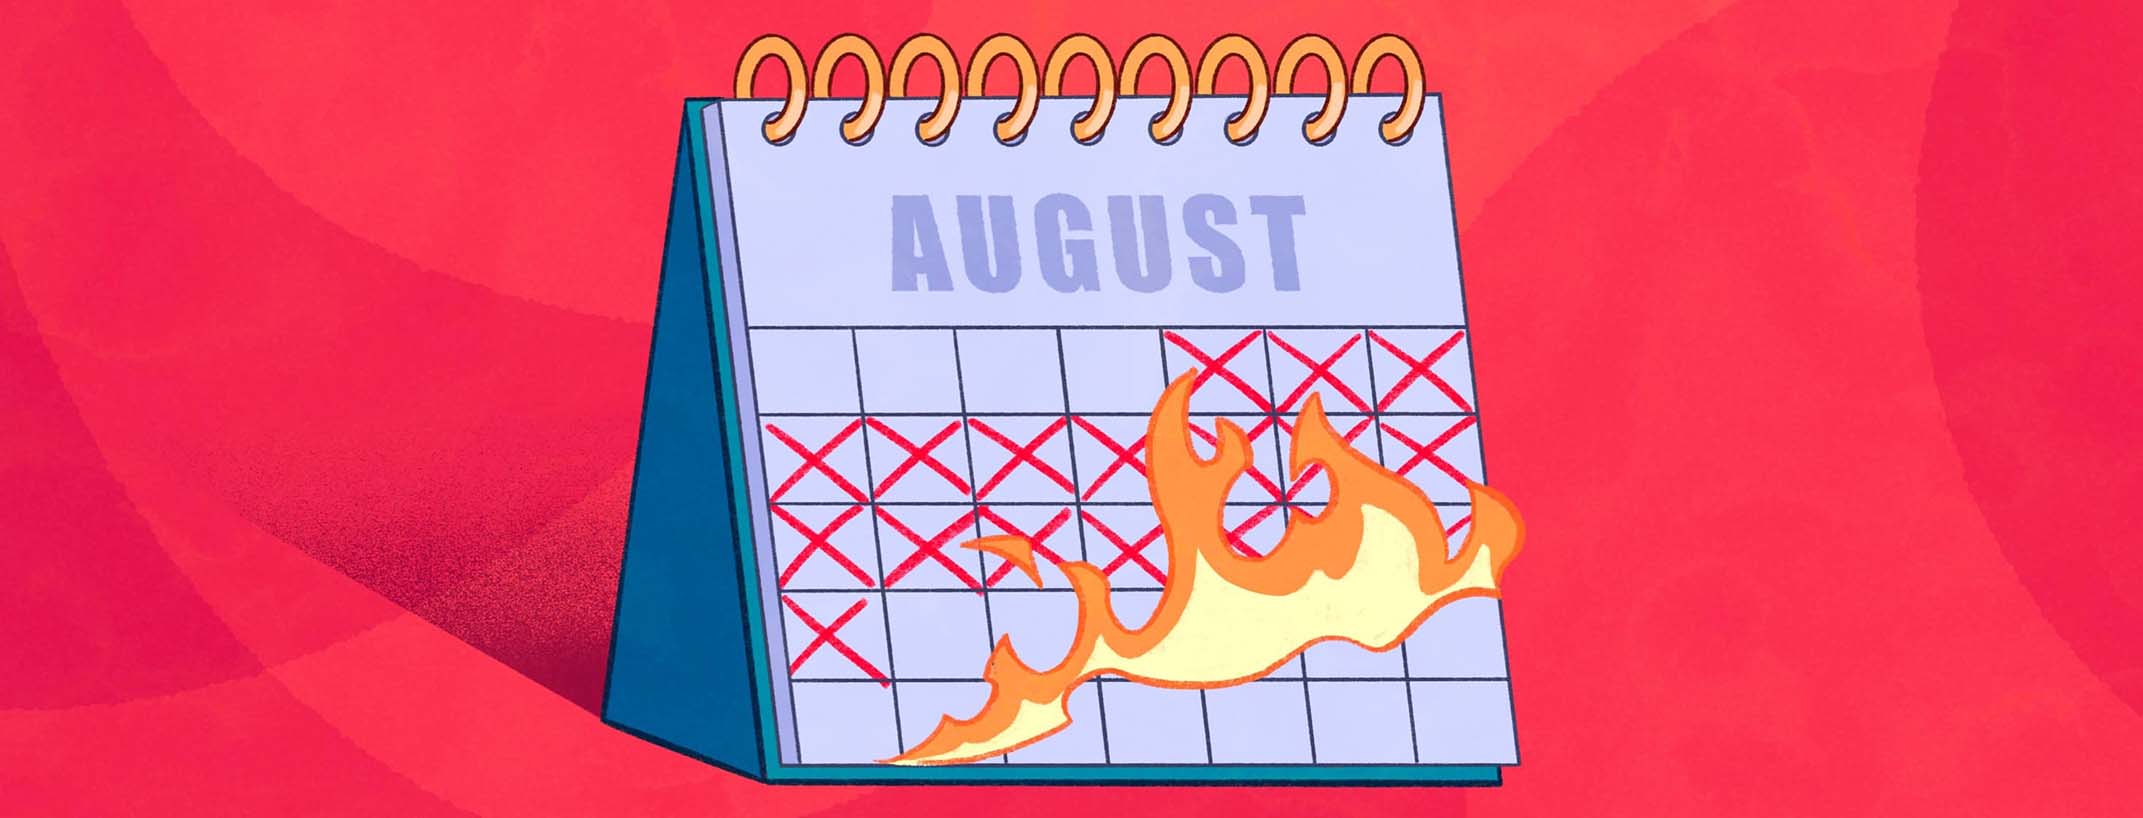 A tabletop calendar with flames burning up the remainder of a busy month